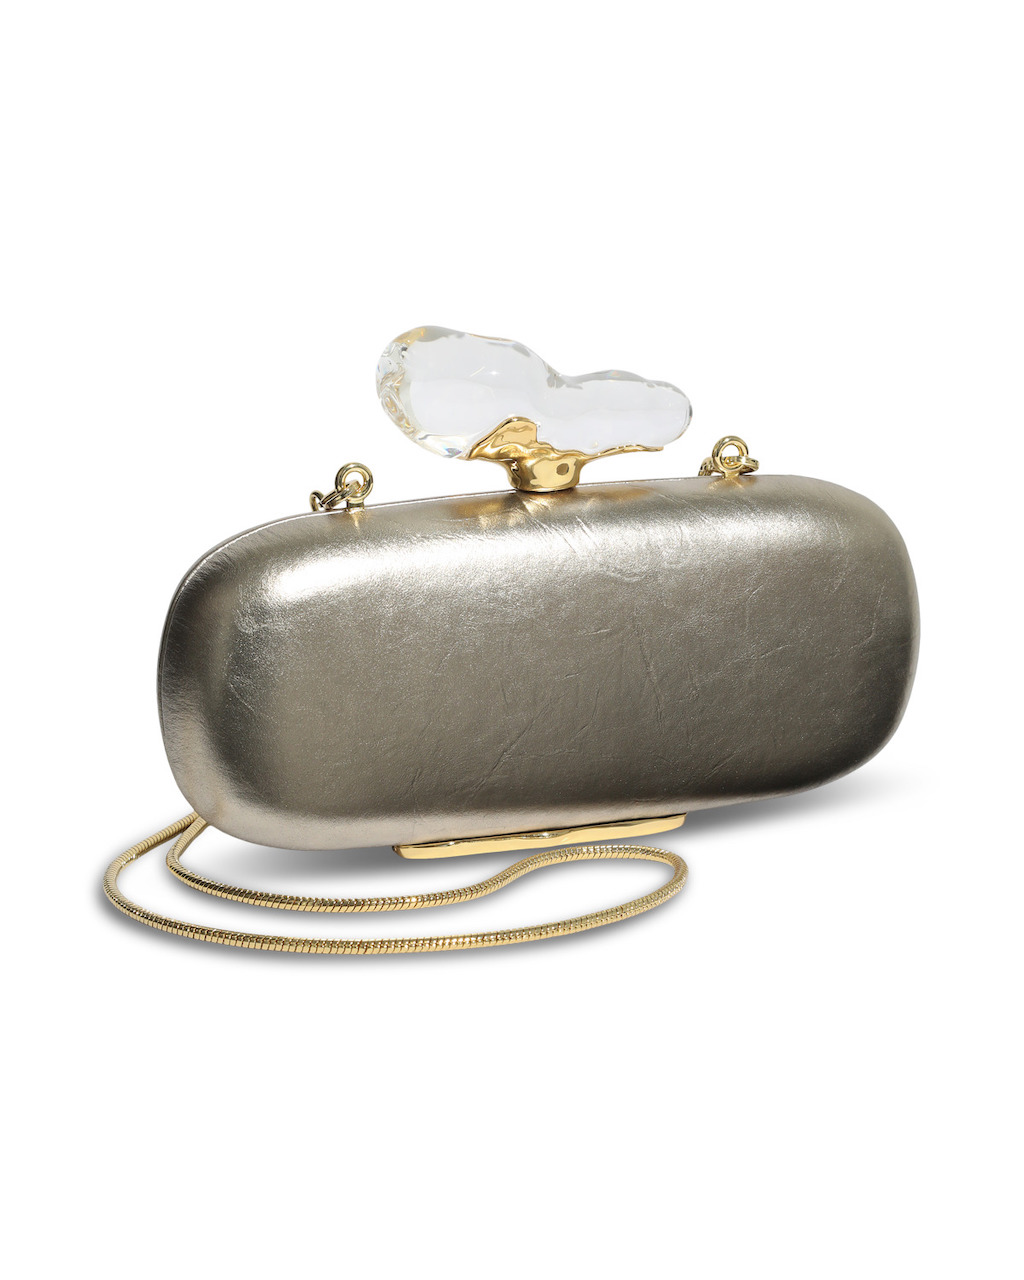 Alexis Bittar Soft Metallic Leather Clutch in Champagne